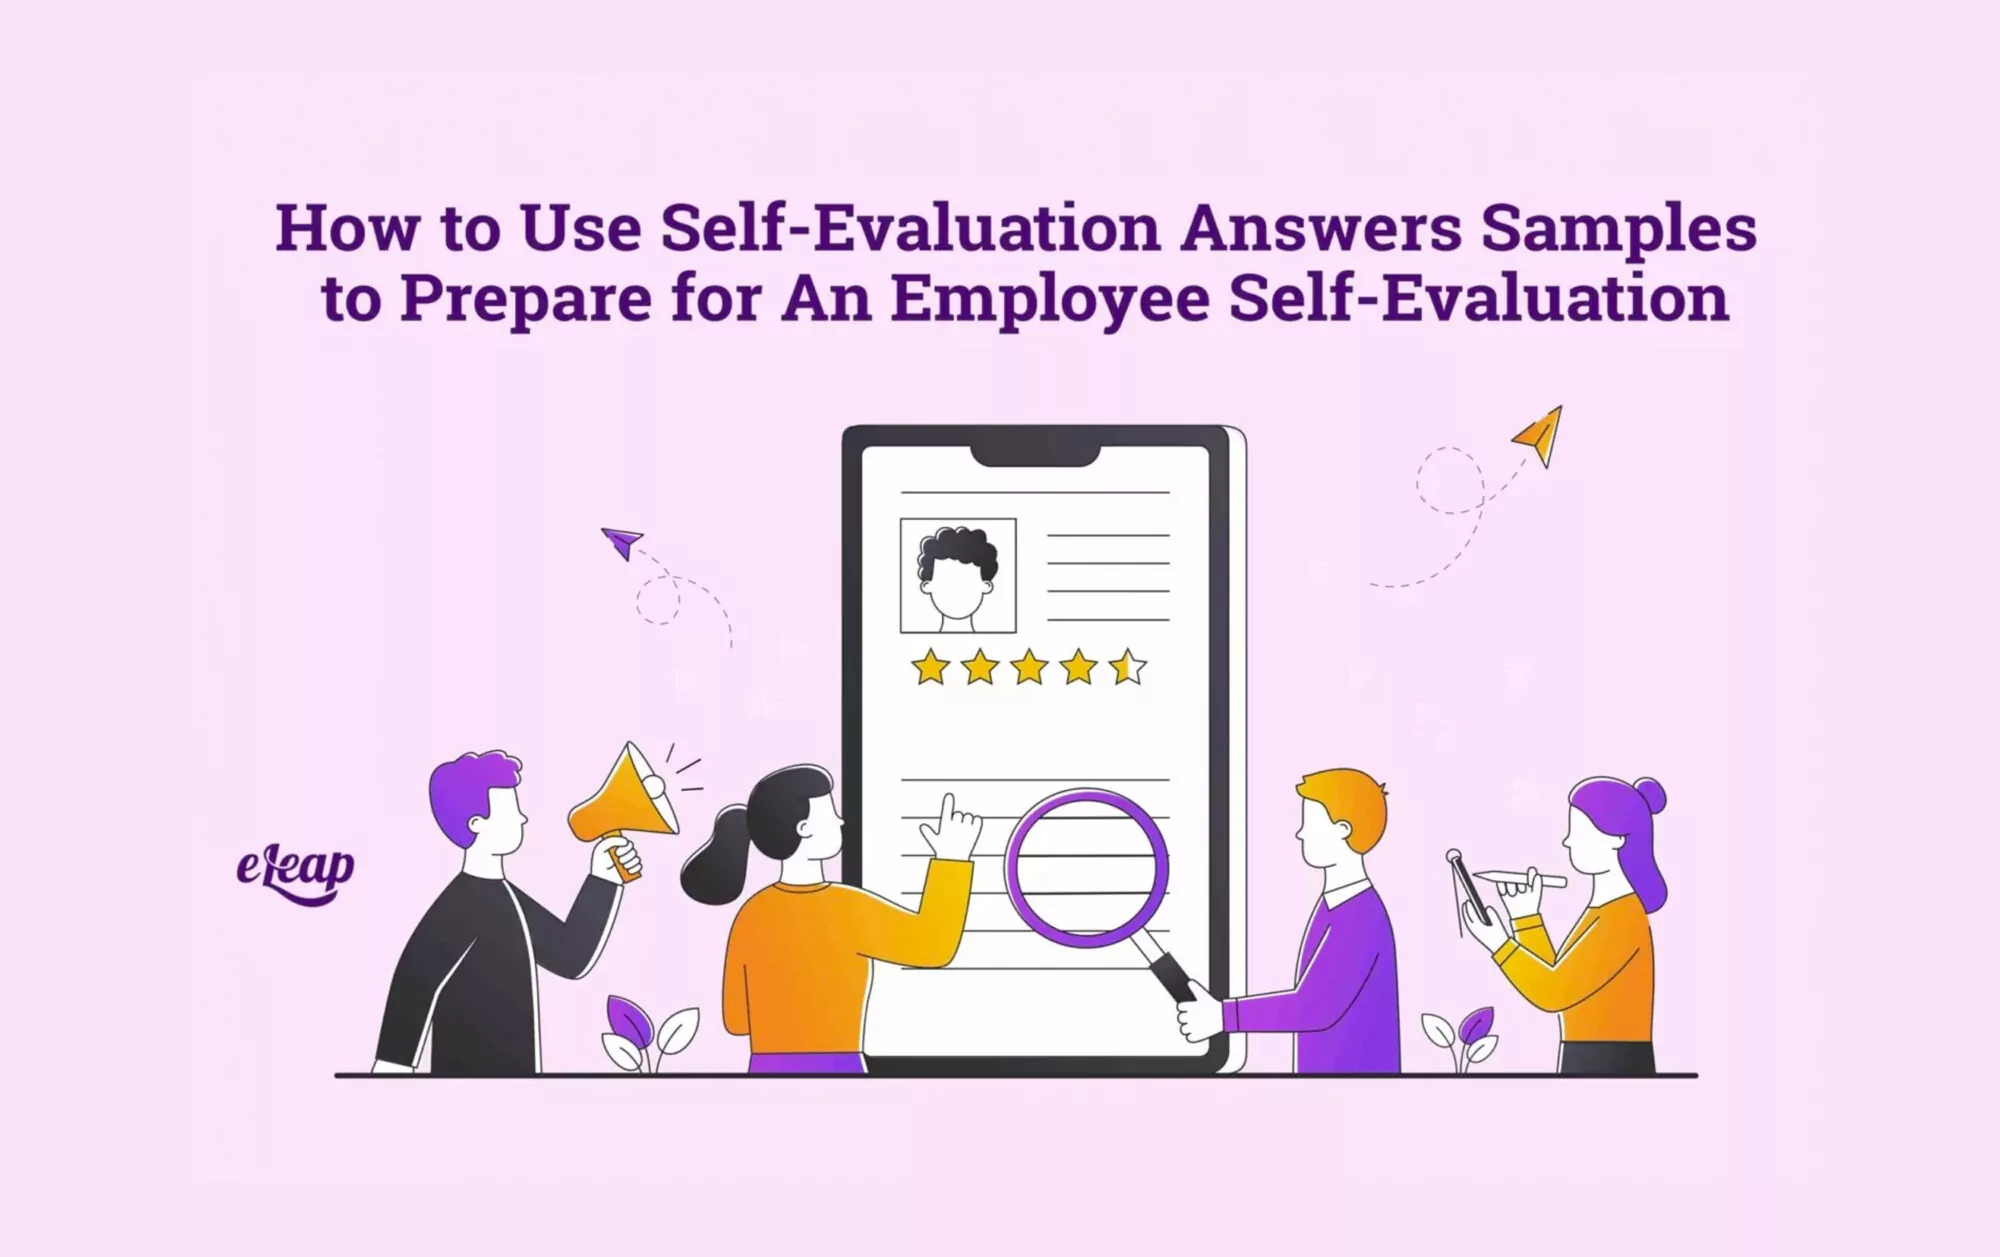 Self-Evaluation Answers Samples